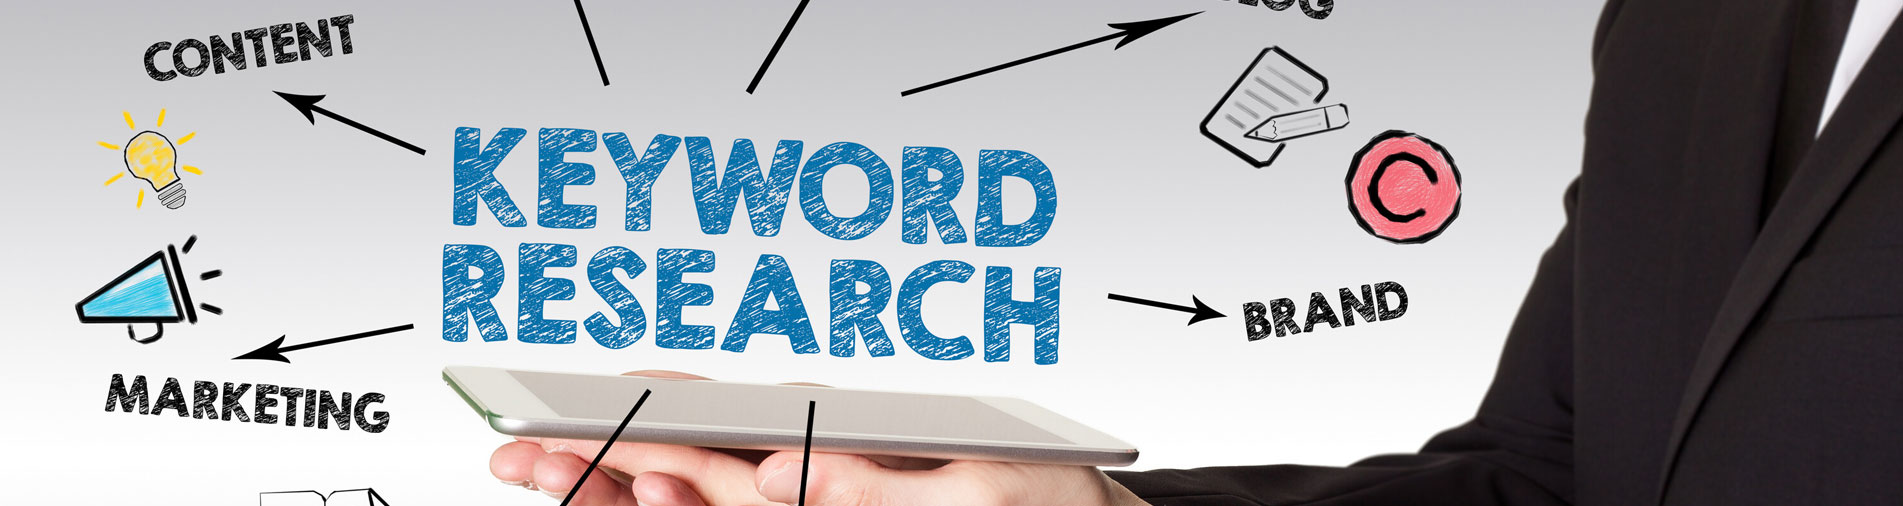 Tools for Keyword Research